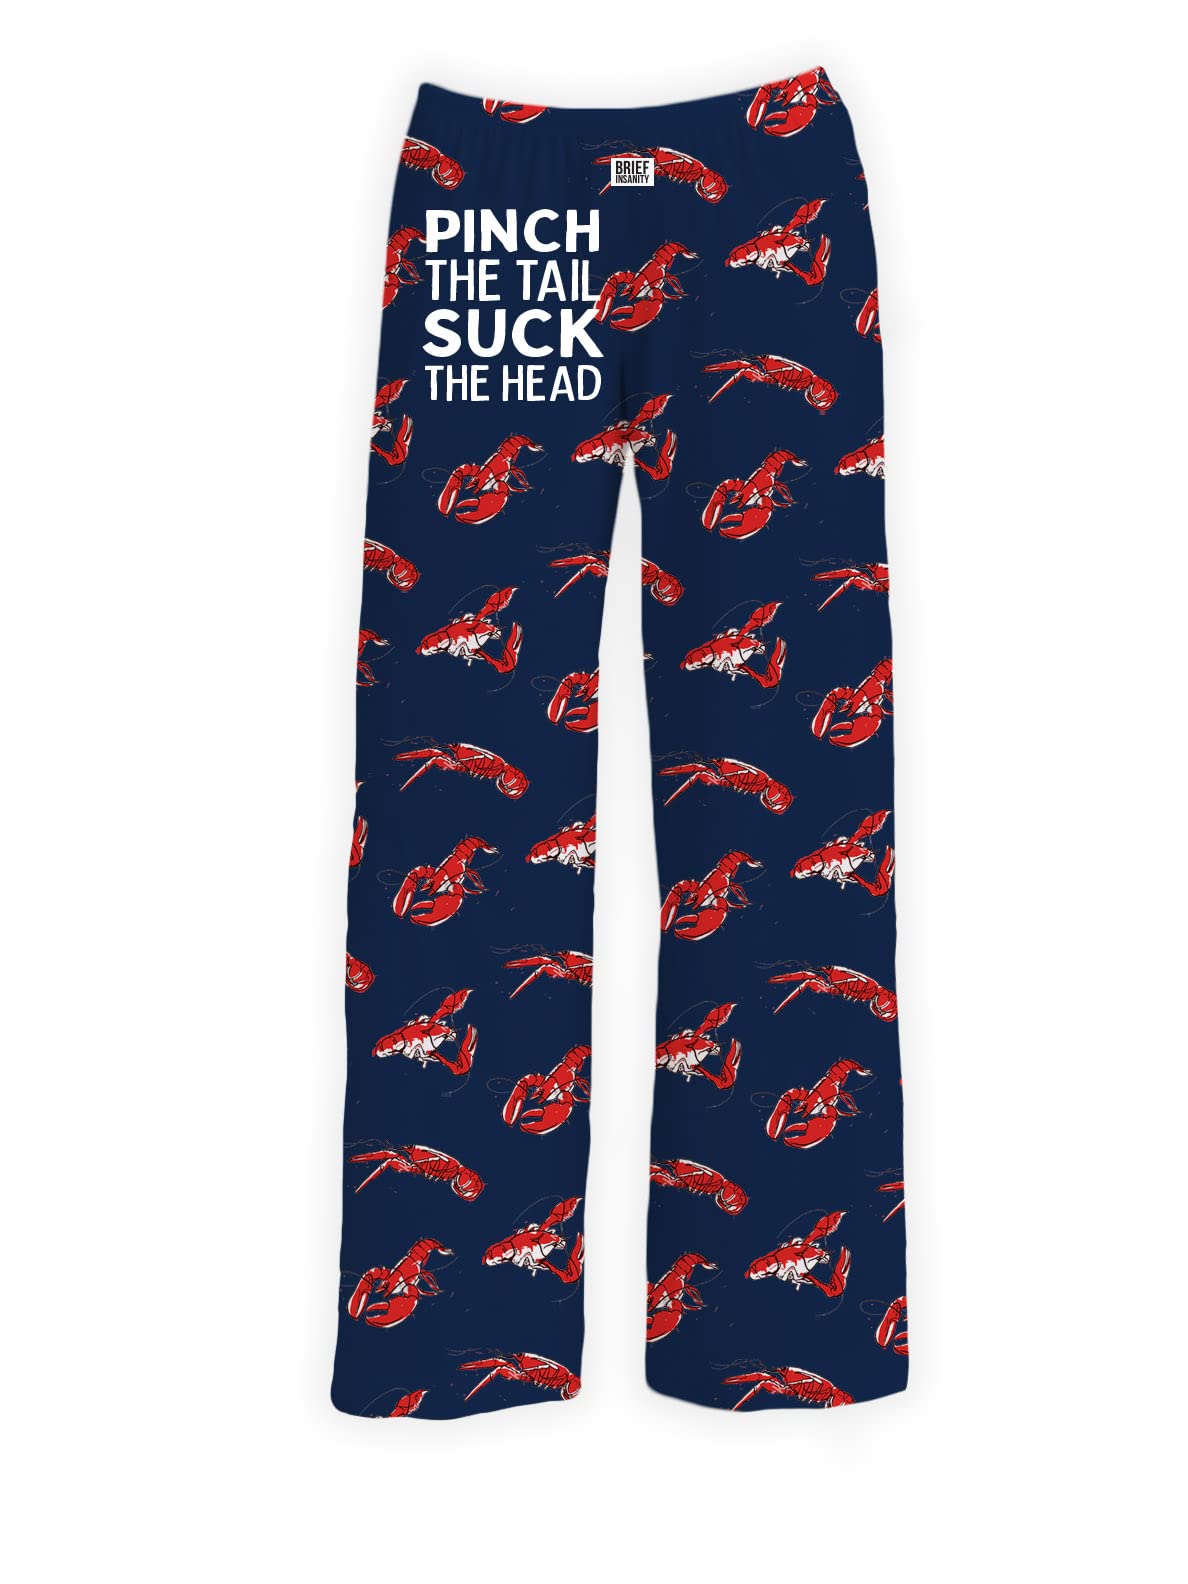 Lobster Pinch the Tail, Suck the Head Pajama Pants